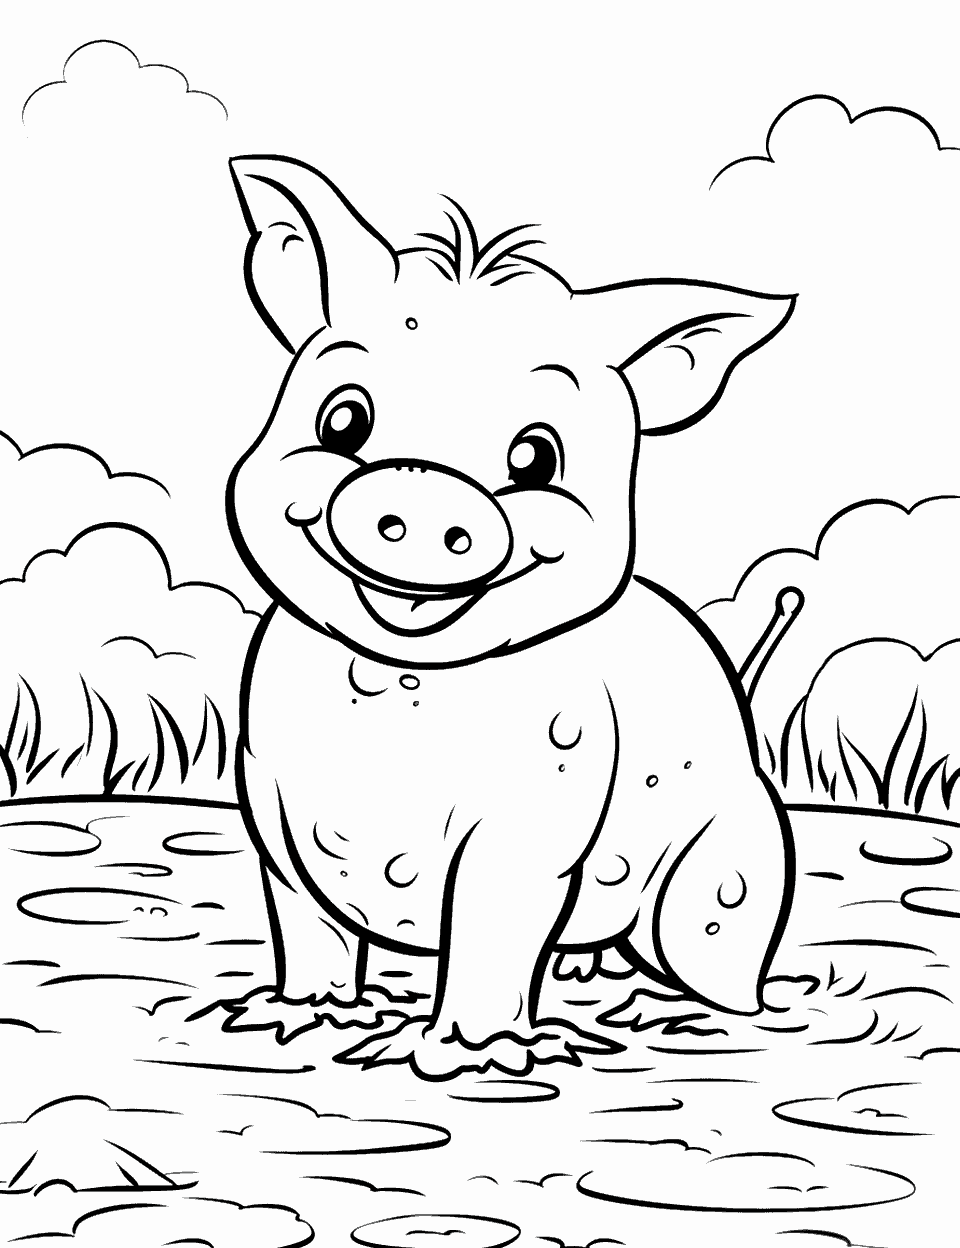 Pig Rolling in Mud Farm Coloring Page - A happy pig rolling in a mud puddle.